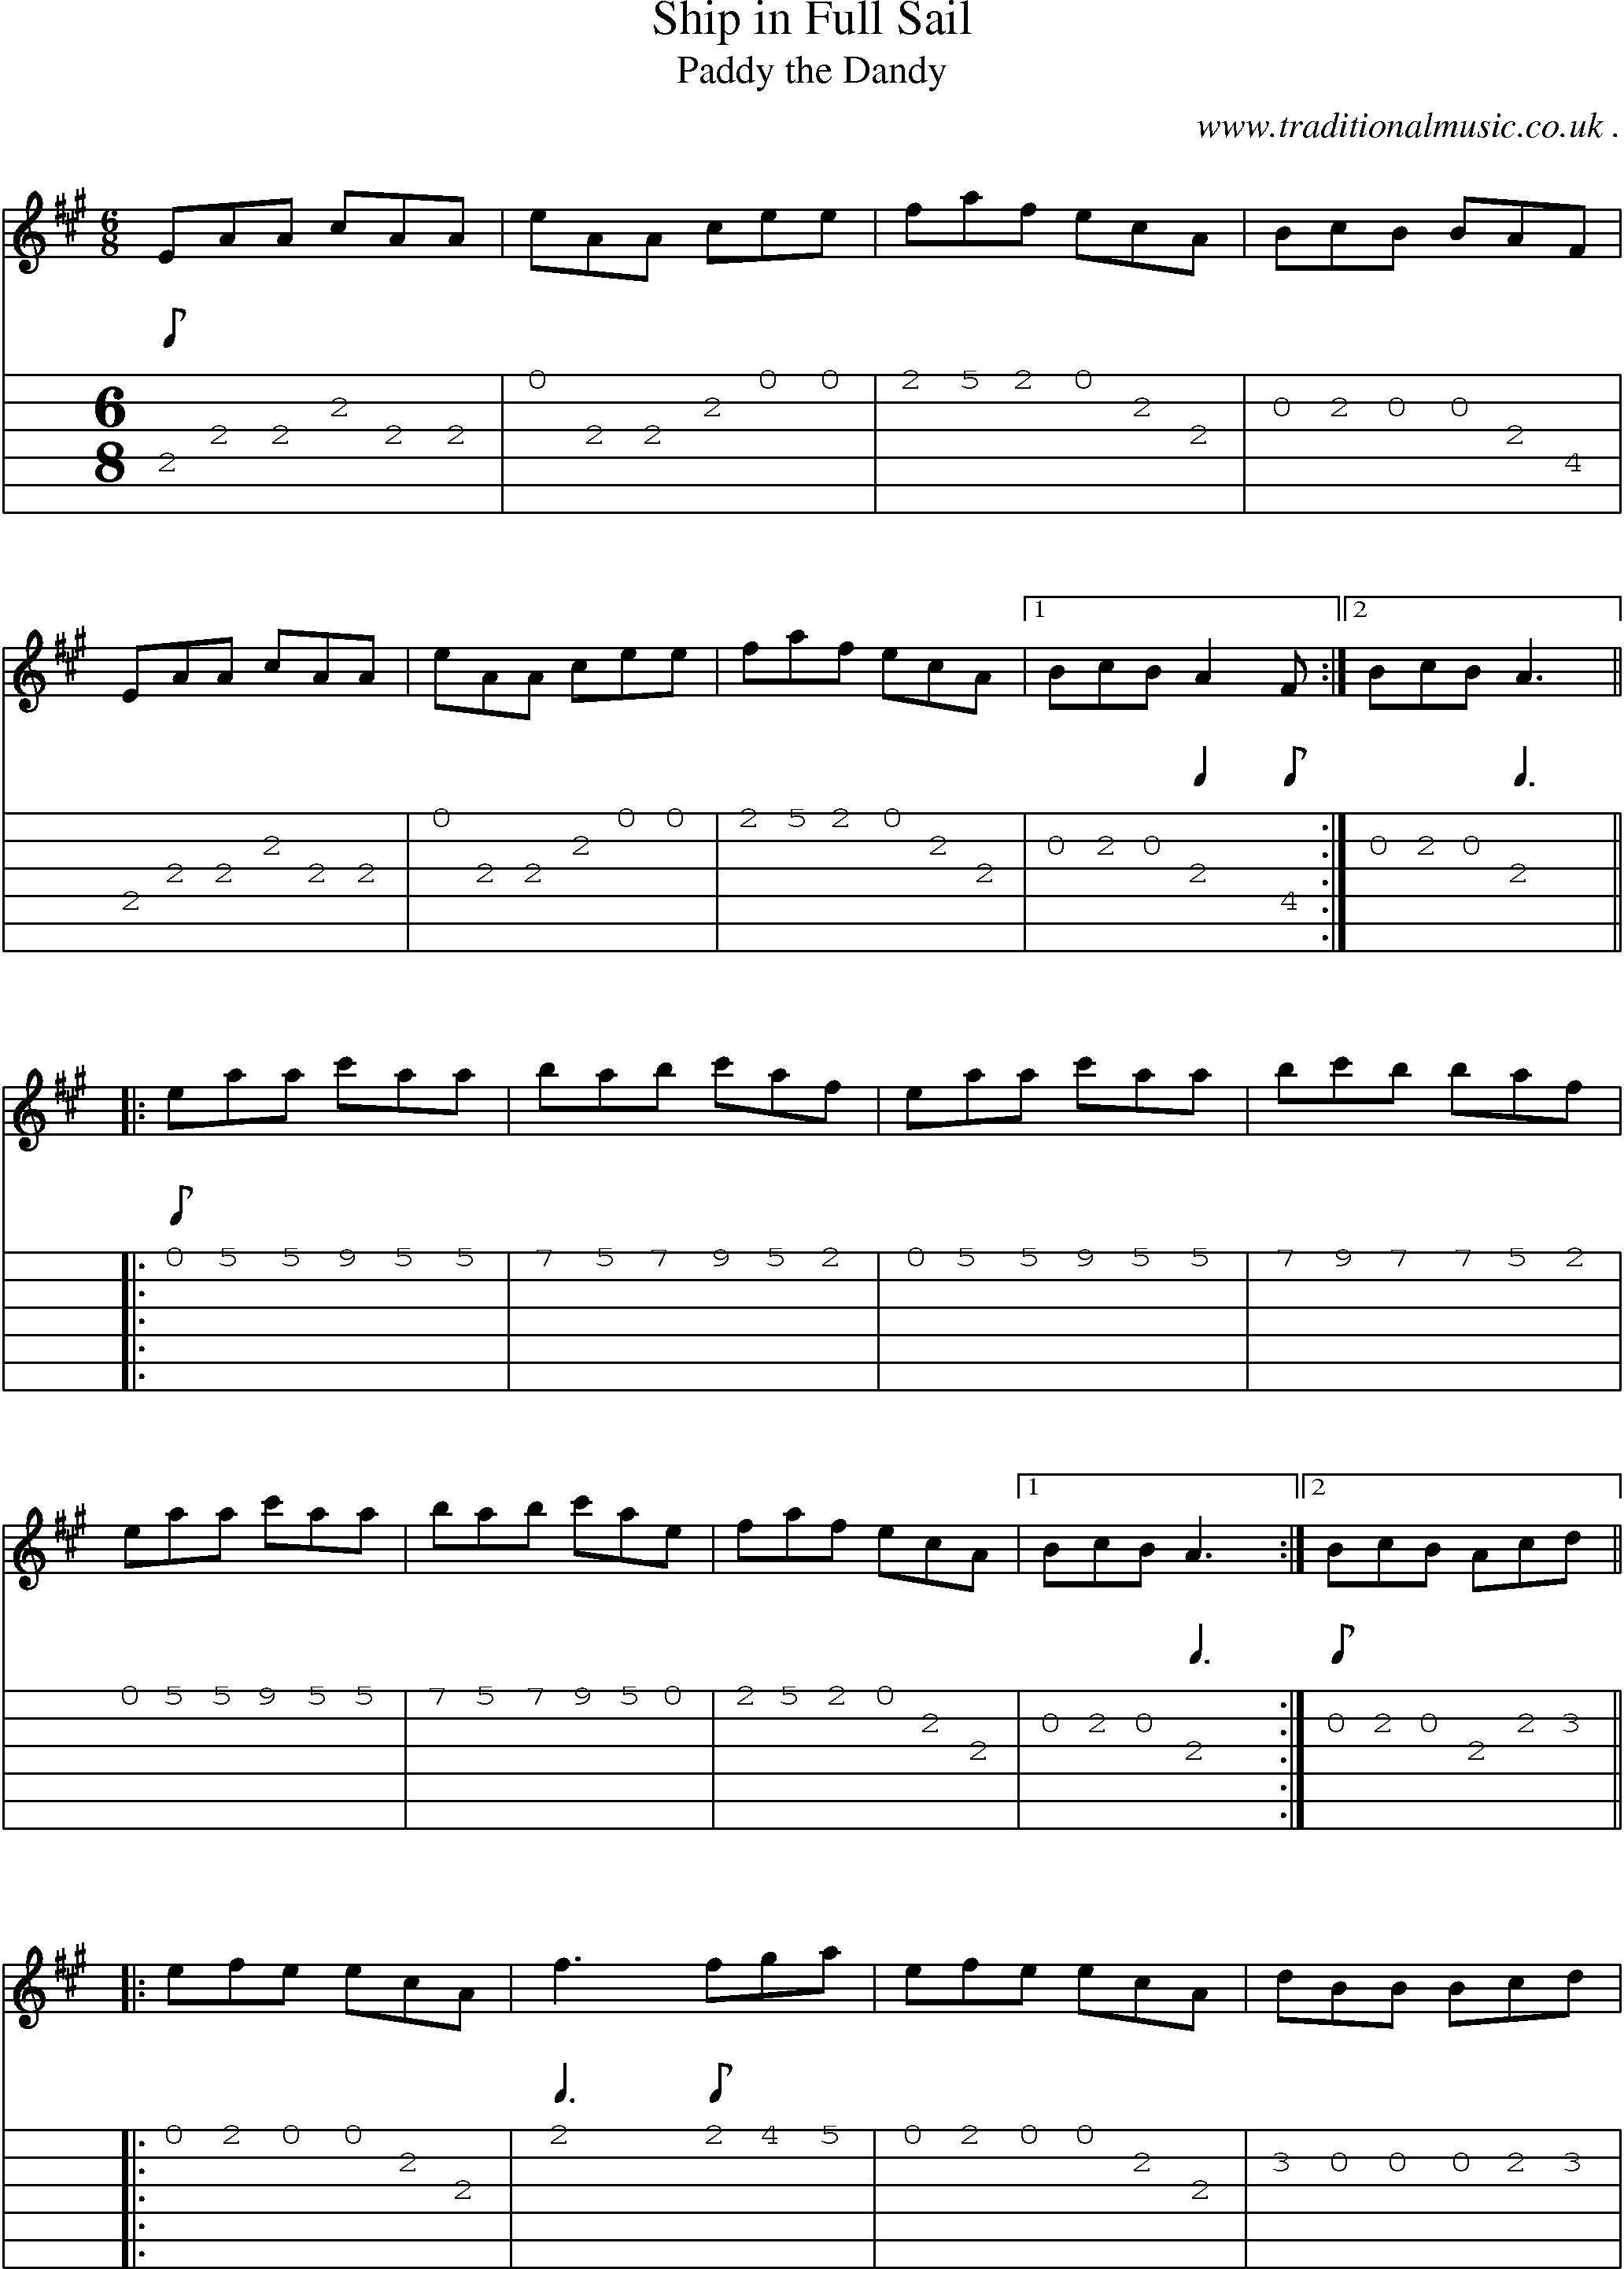 Sheet-Music and Guitar Tabs for Ship In Full Sail